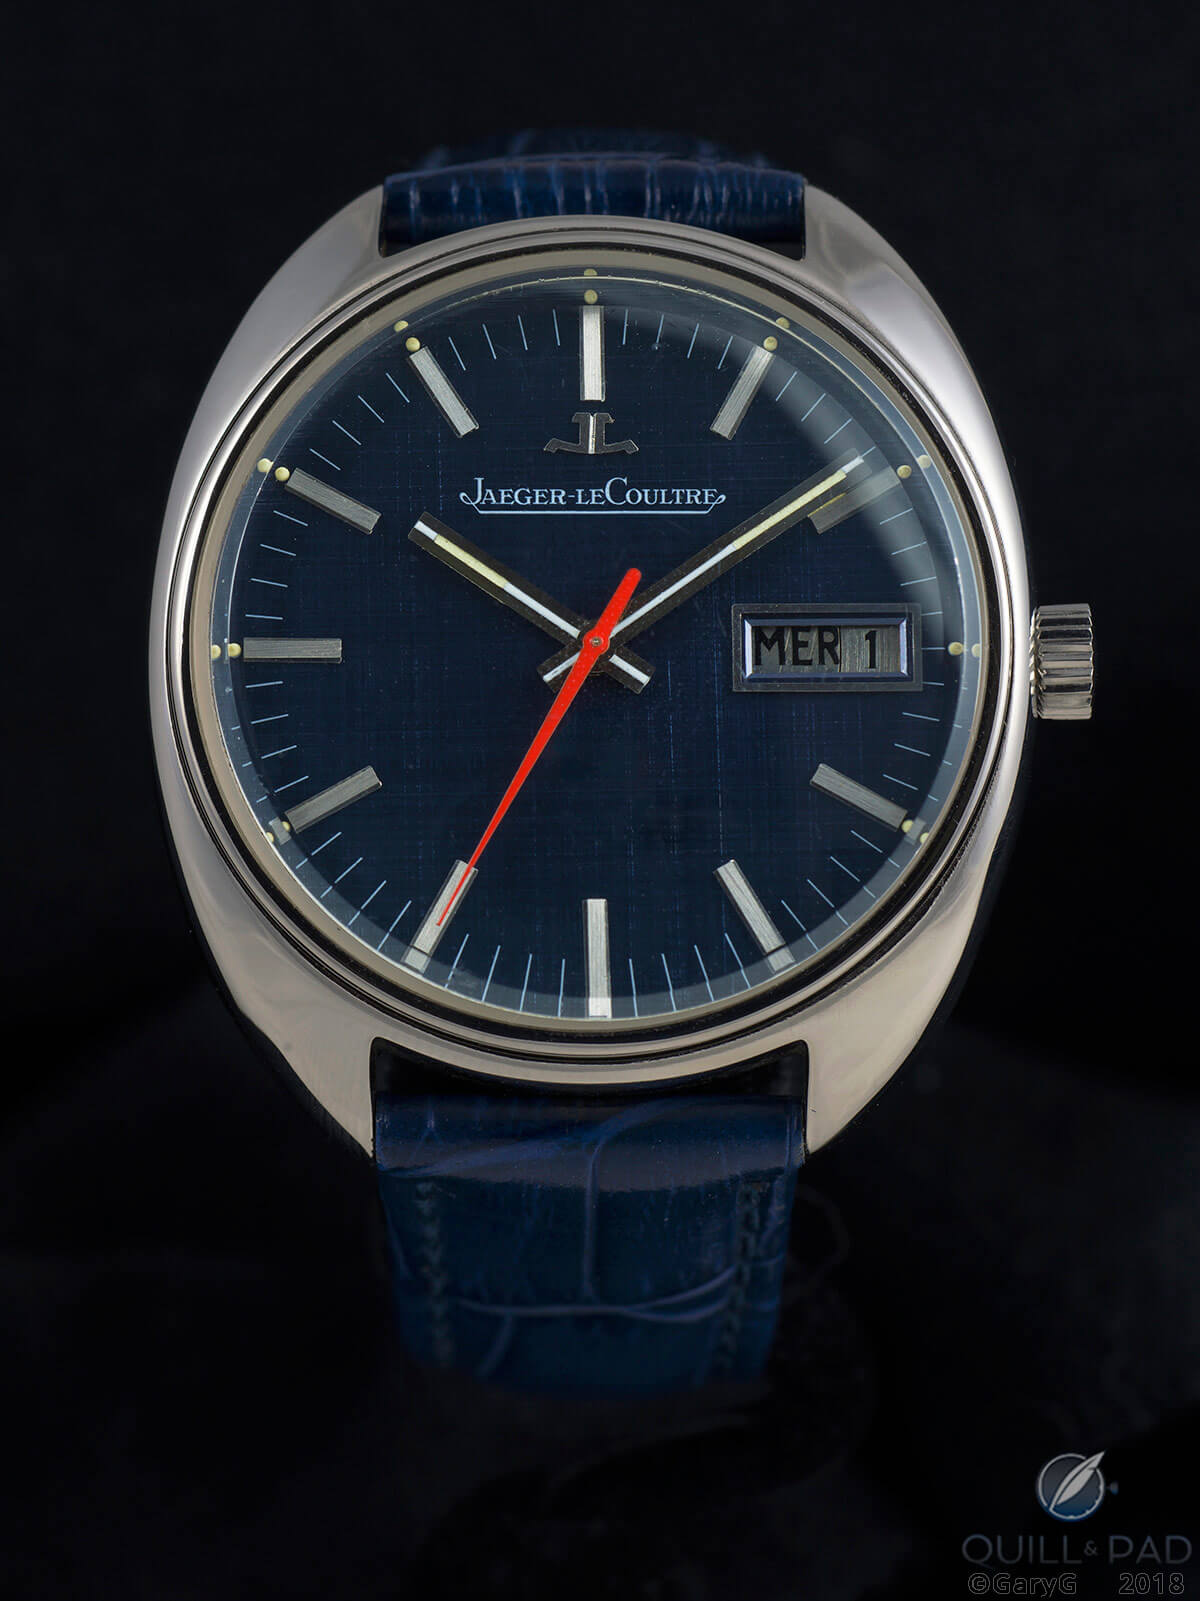 Am I blue? Jaeger-LeCoultre prototype watch showing its blue persona